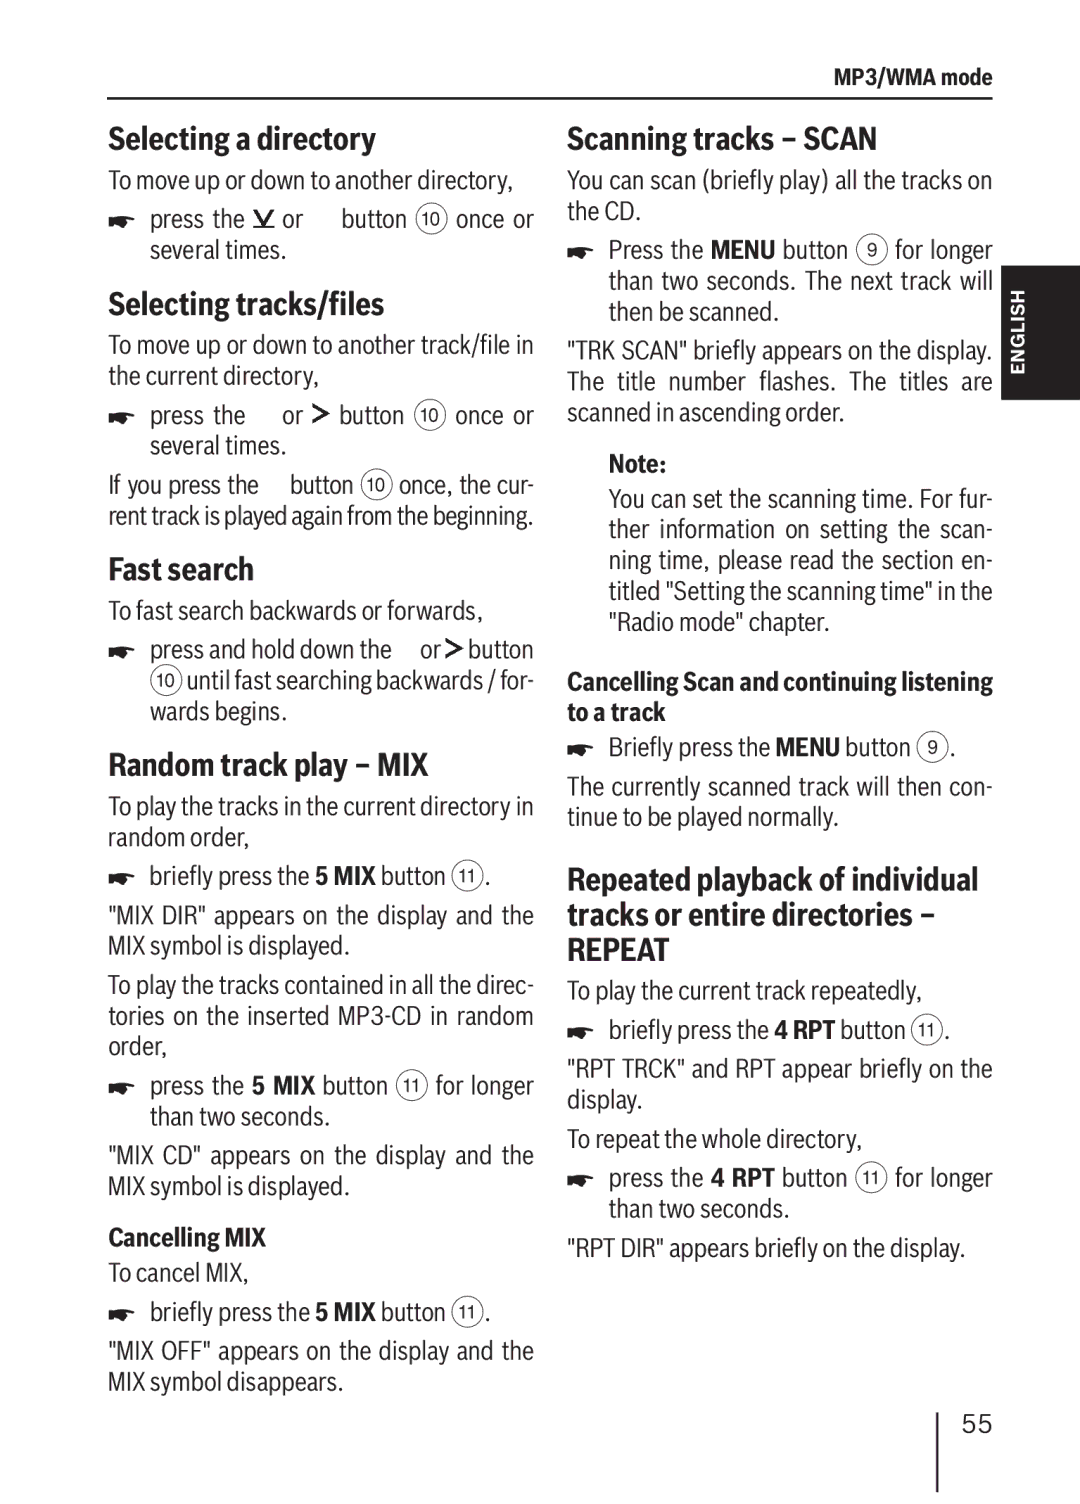 Blaupunkt MP36 operating instructions Selecting a directory, Selecting tracks/files, Fast search 